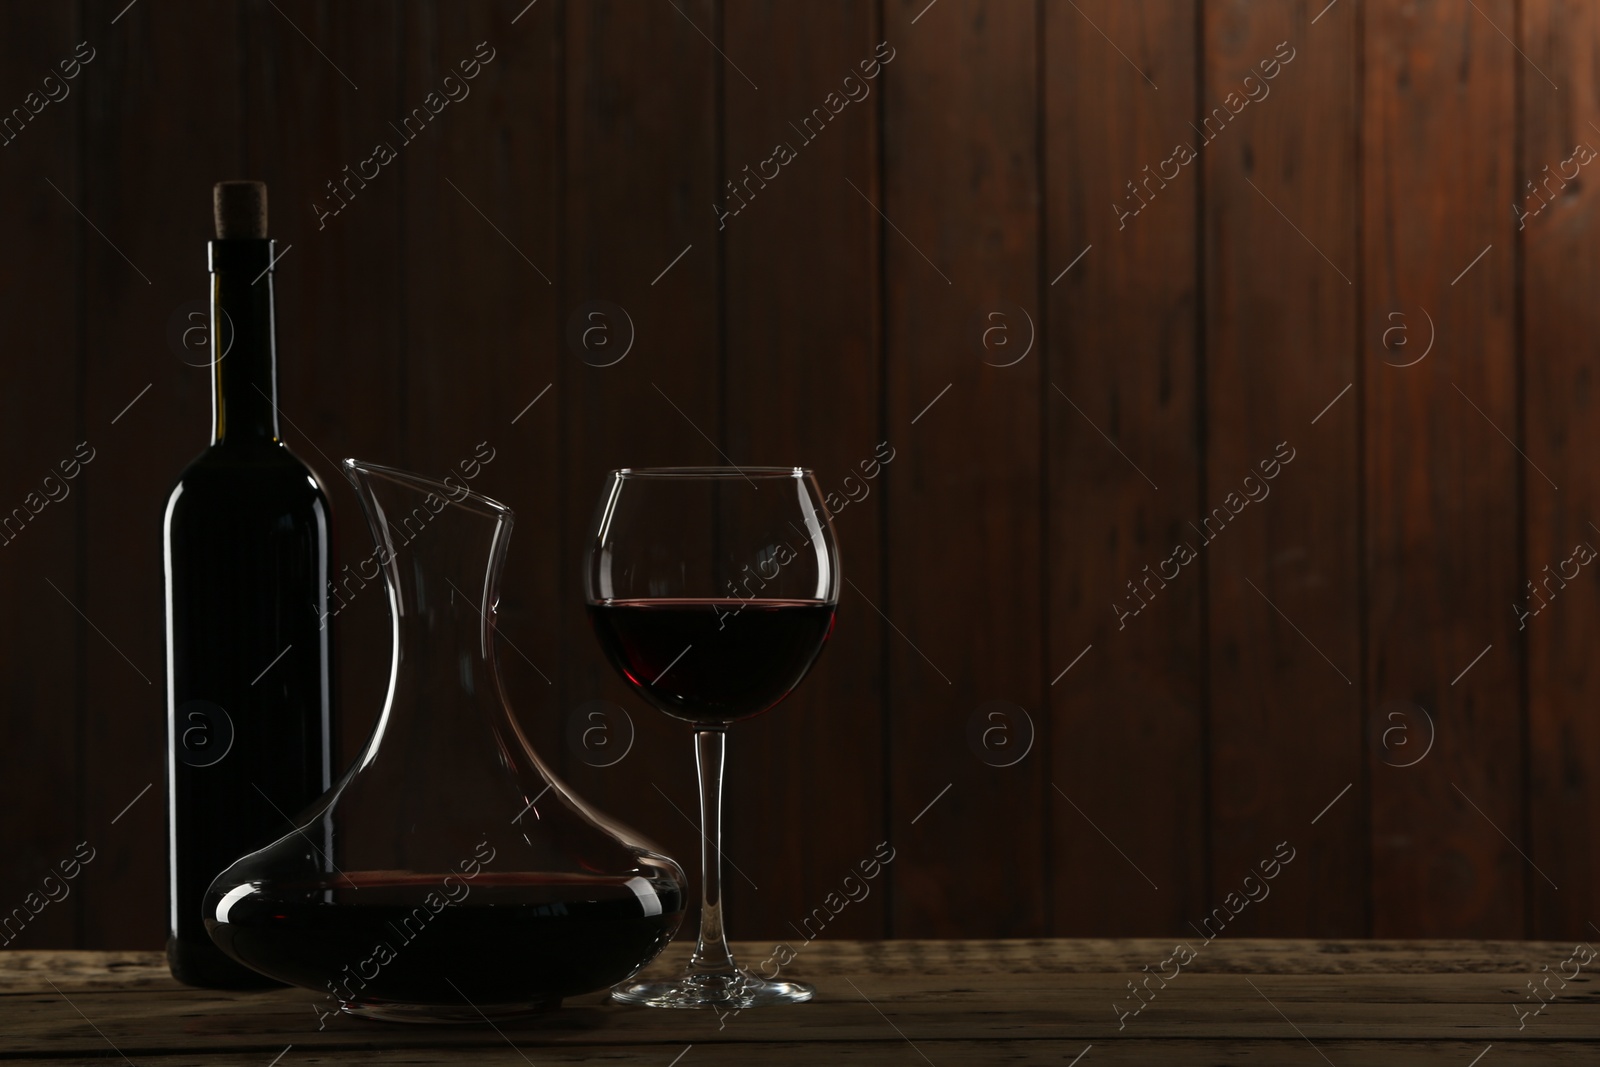 Photo of Bottle, decanter and glass with red wine on table against dark background